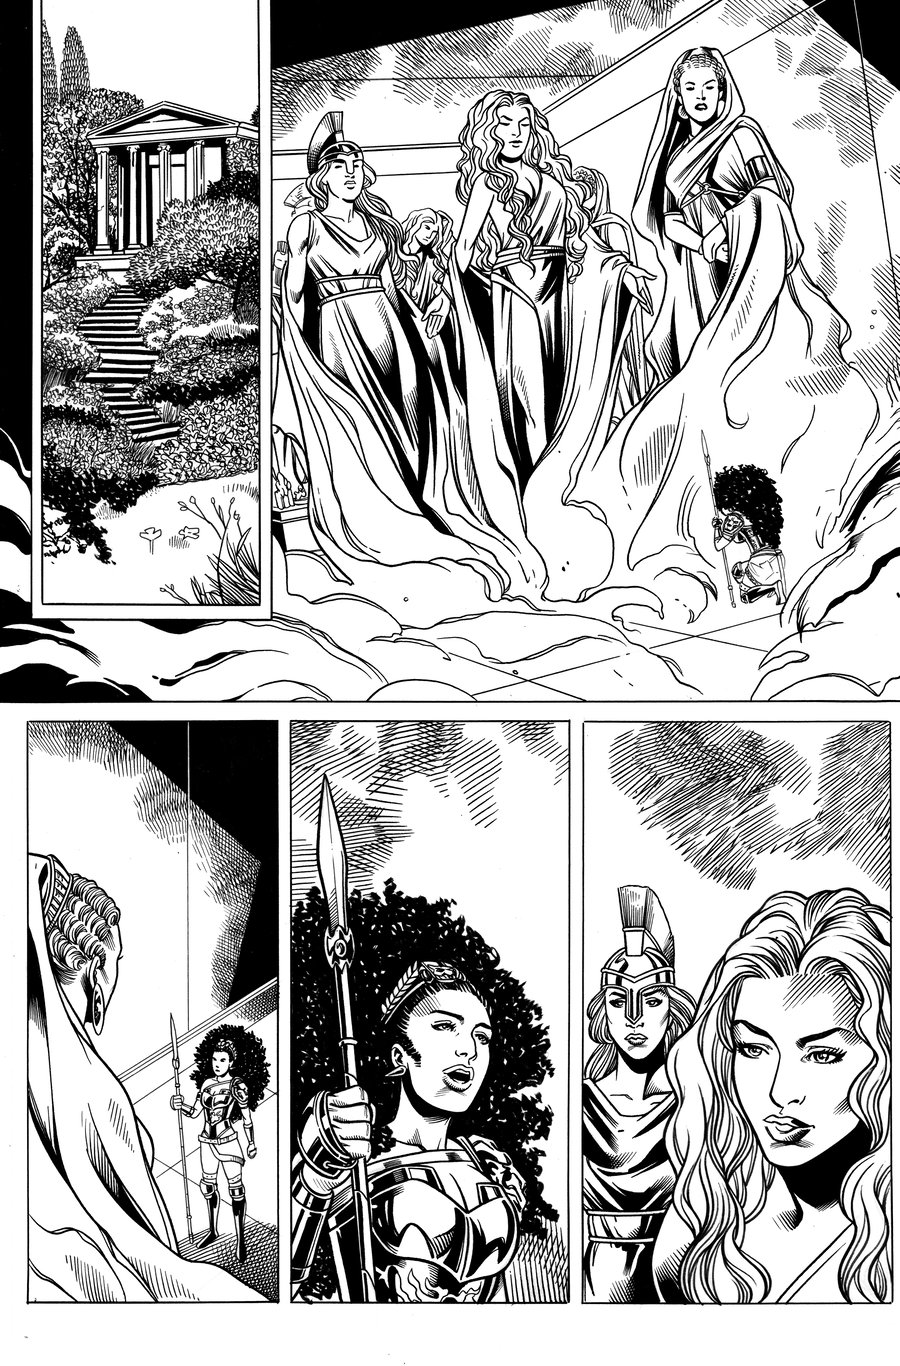 Image of Nubia and the Amazons #5 PG 14